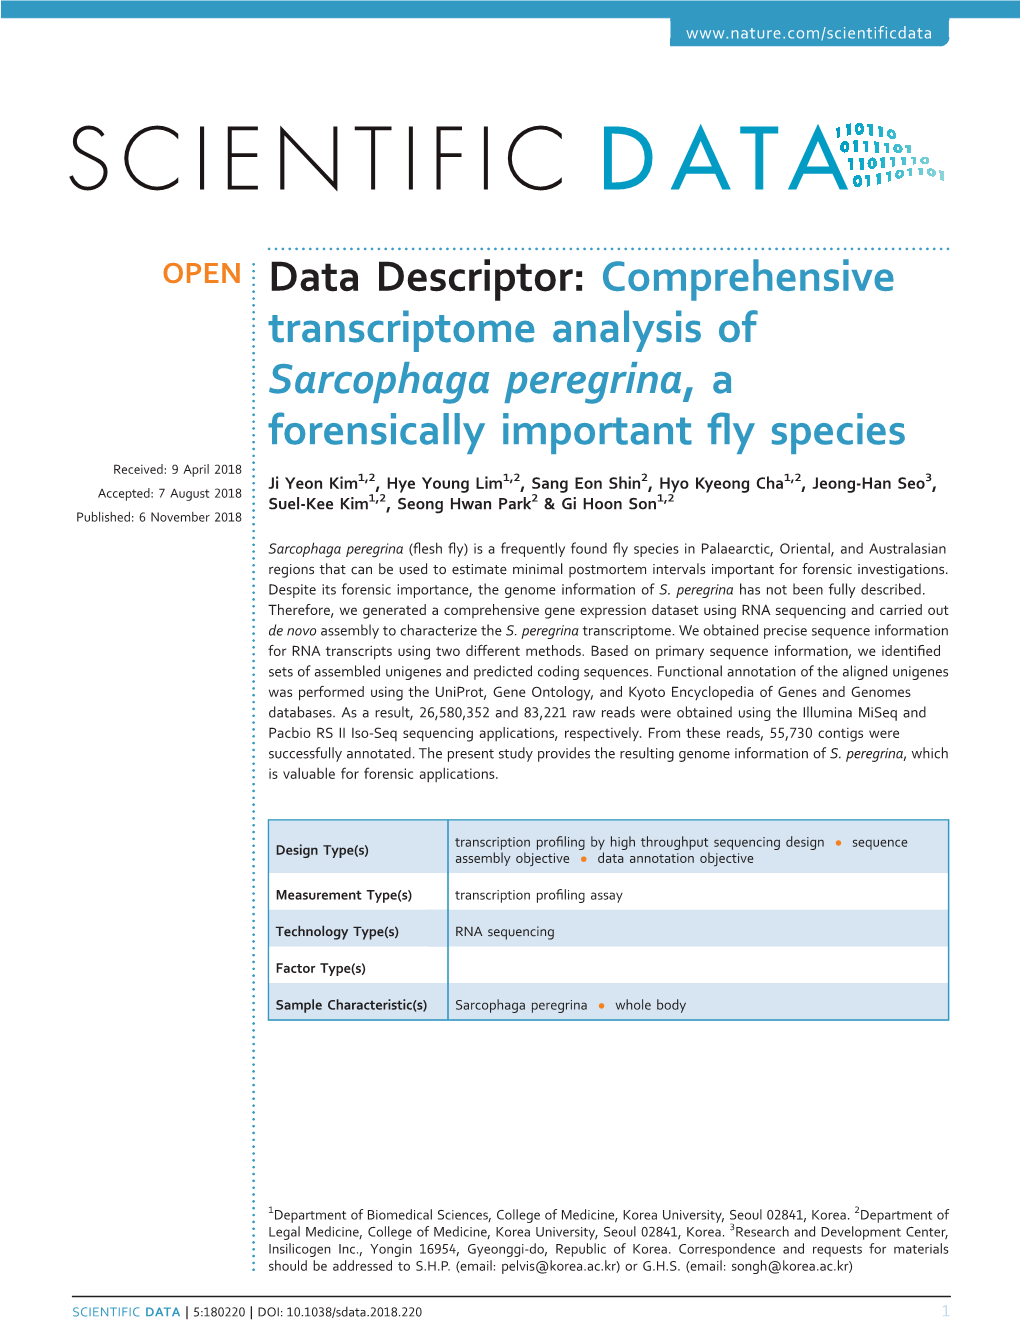 Comprehensive Transcriptome Analysis of Sarcophaga Peregrina, a Forensically Important Fly Species